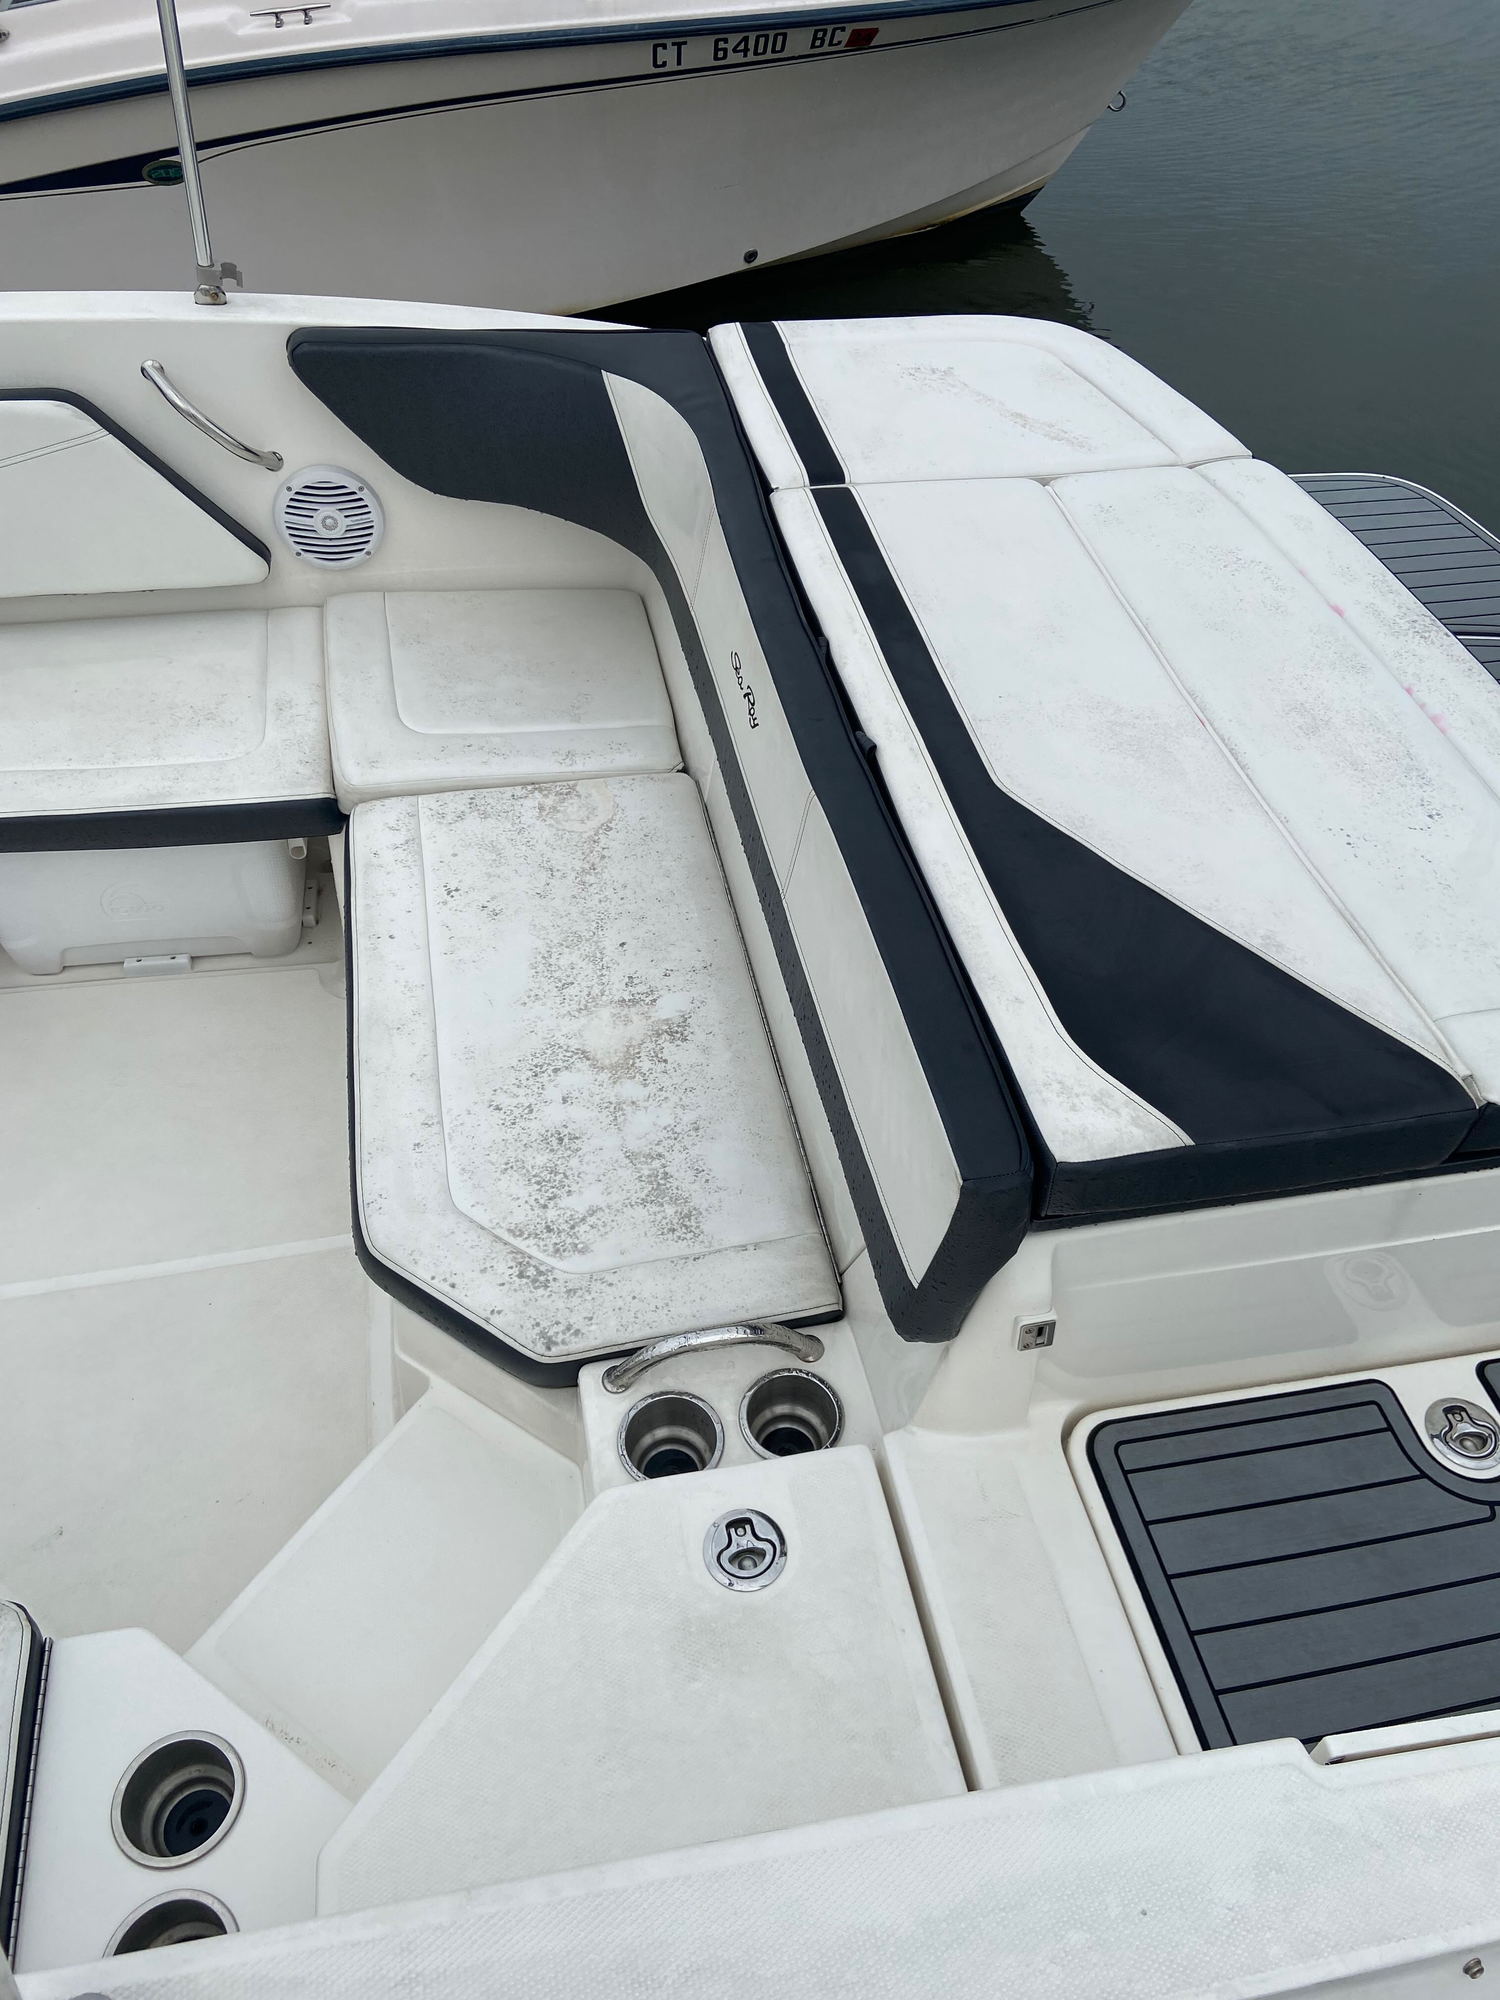 Very stubborn vinyl seat mold - The Hull Truth - Boating and Fishing Forum